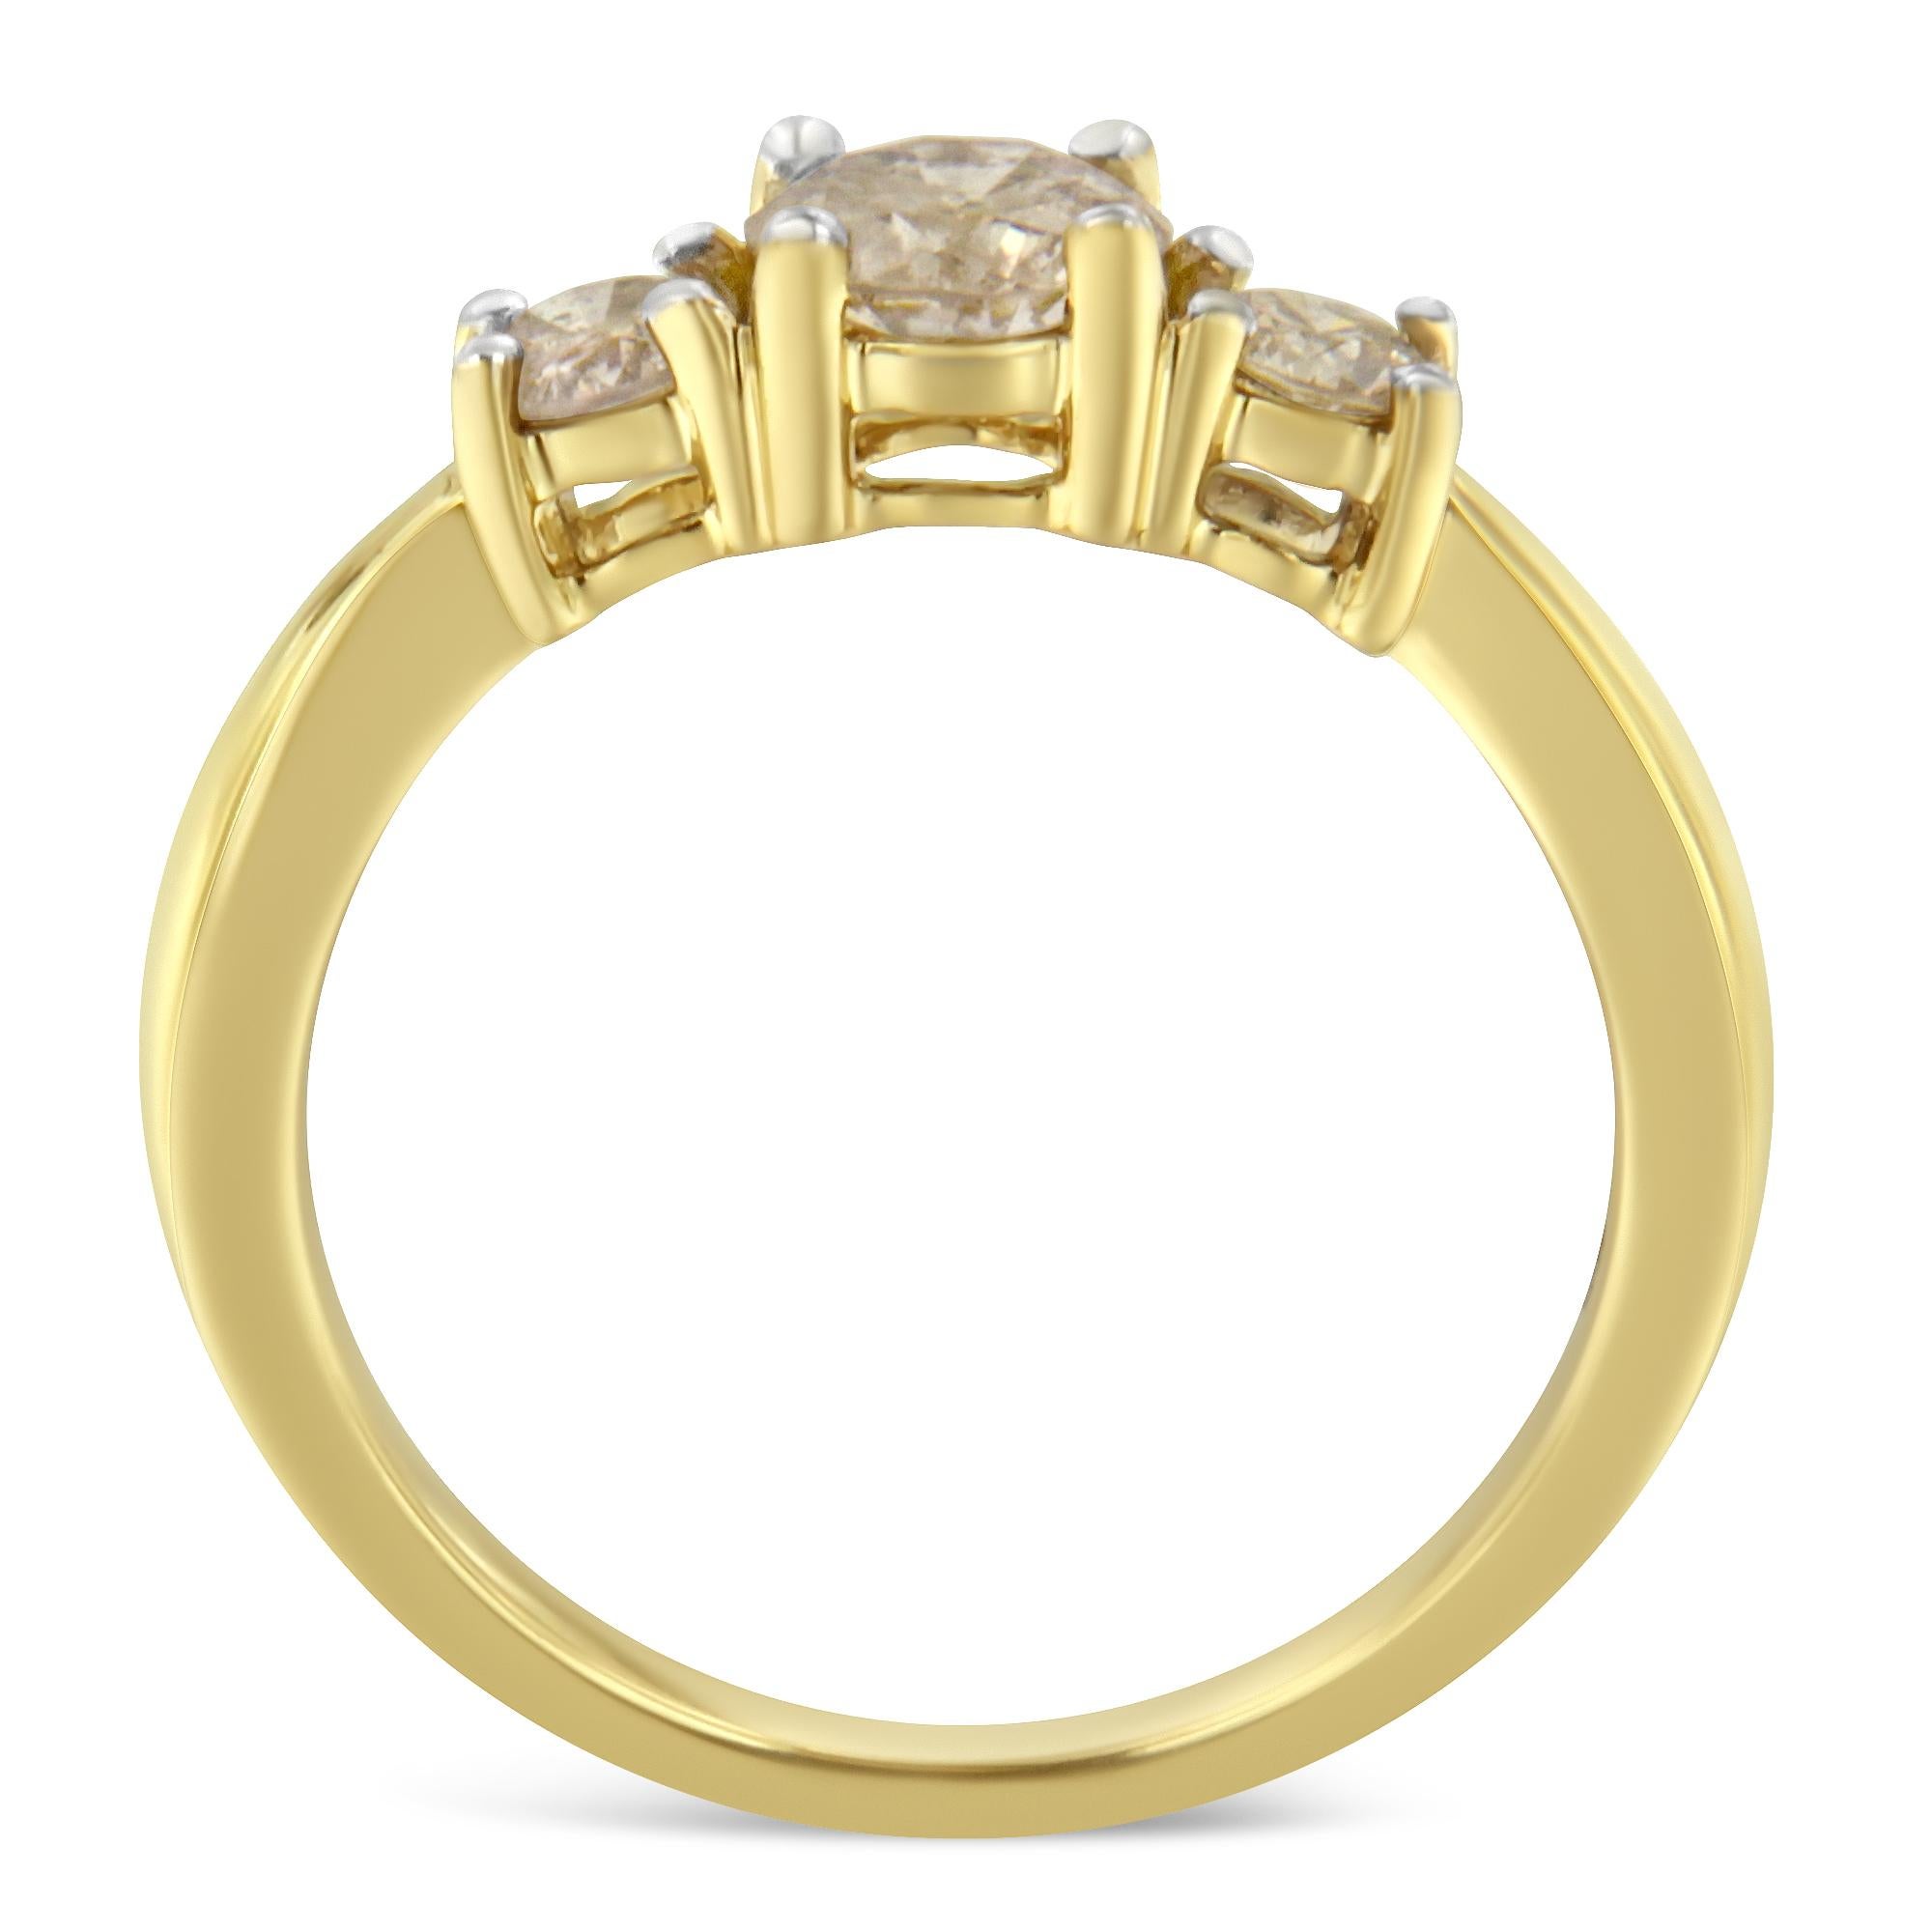 Beautifully crafted of 10-karat yellow gold, this stunning anniversary ring showcases one carat of diamonds in a classic three-stone design. The yellow gold band looks stunning on all skin tones, while the three center diamond stones are set in